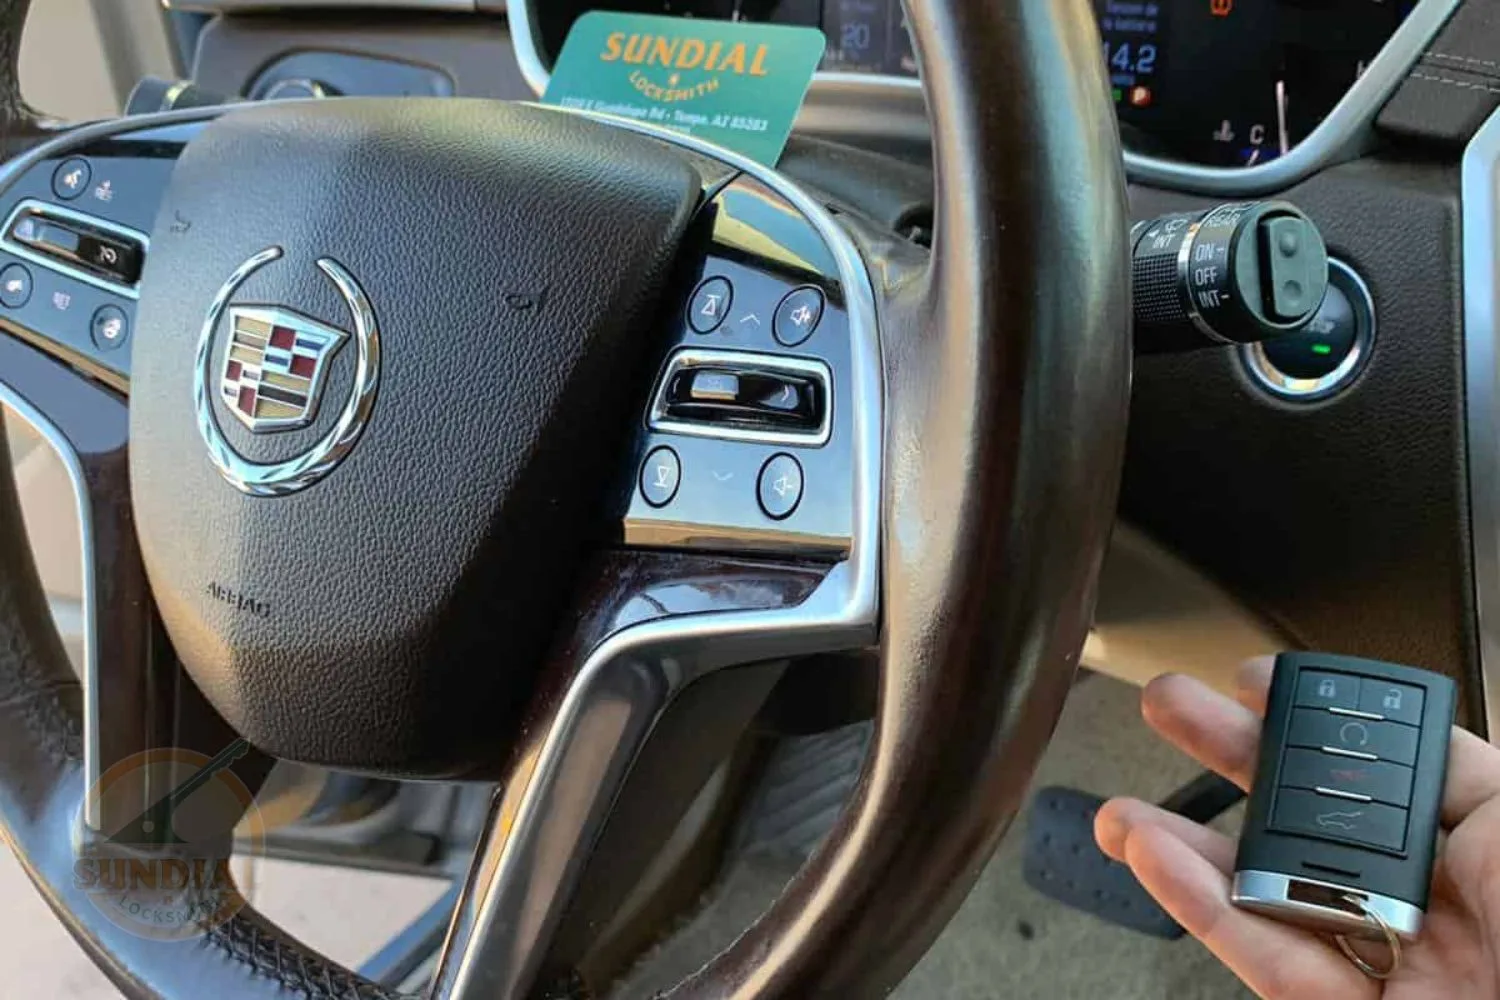 Cadillac car key fob in hand with the steering wheel and dashboard in the background, featuring the Sundial Locksmith business card.